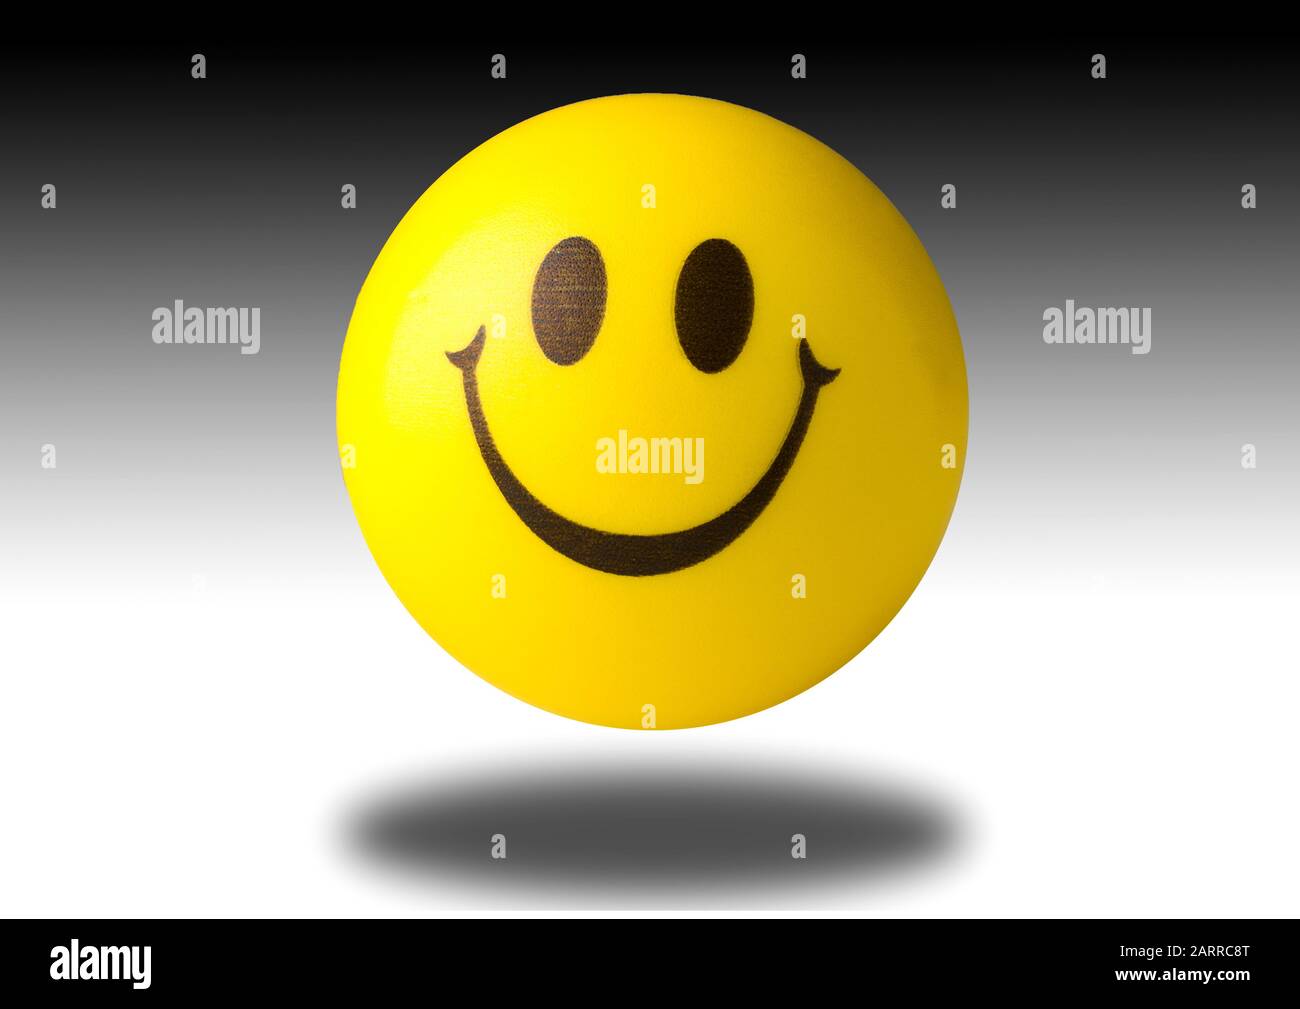 The famous Yellow Smiley Face Icon bouncing rubber ball portrait and landscape. Great for cut out vector Stock Photo